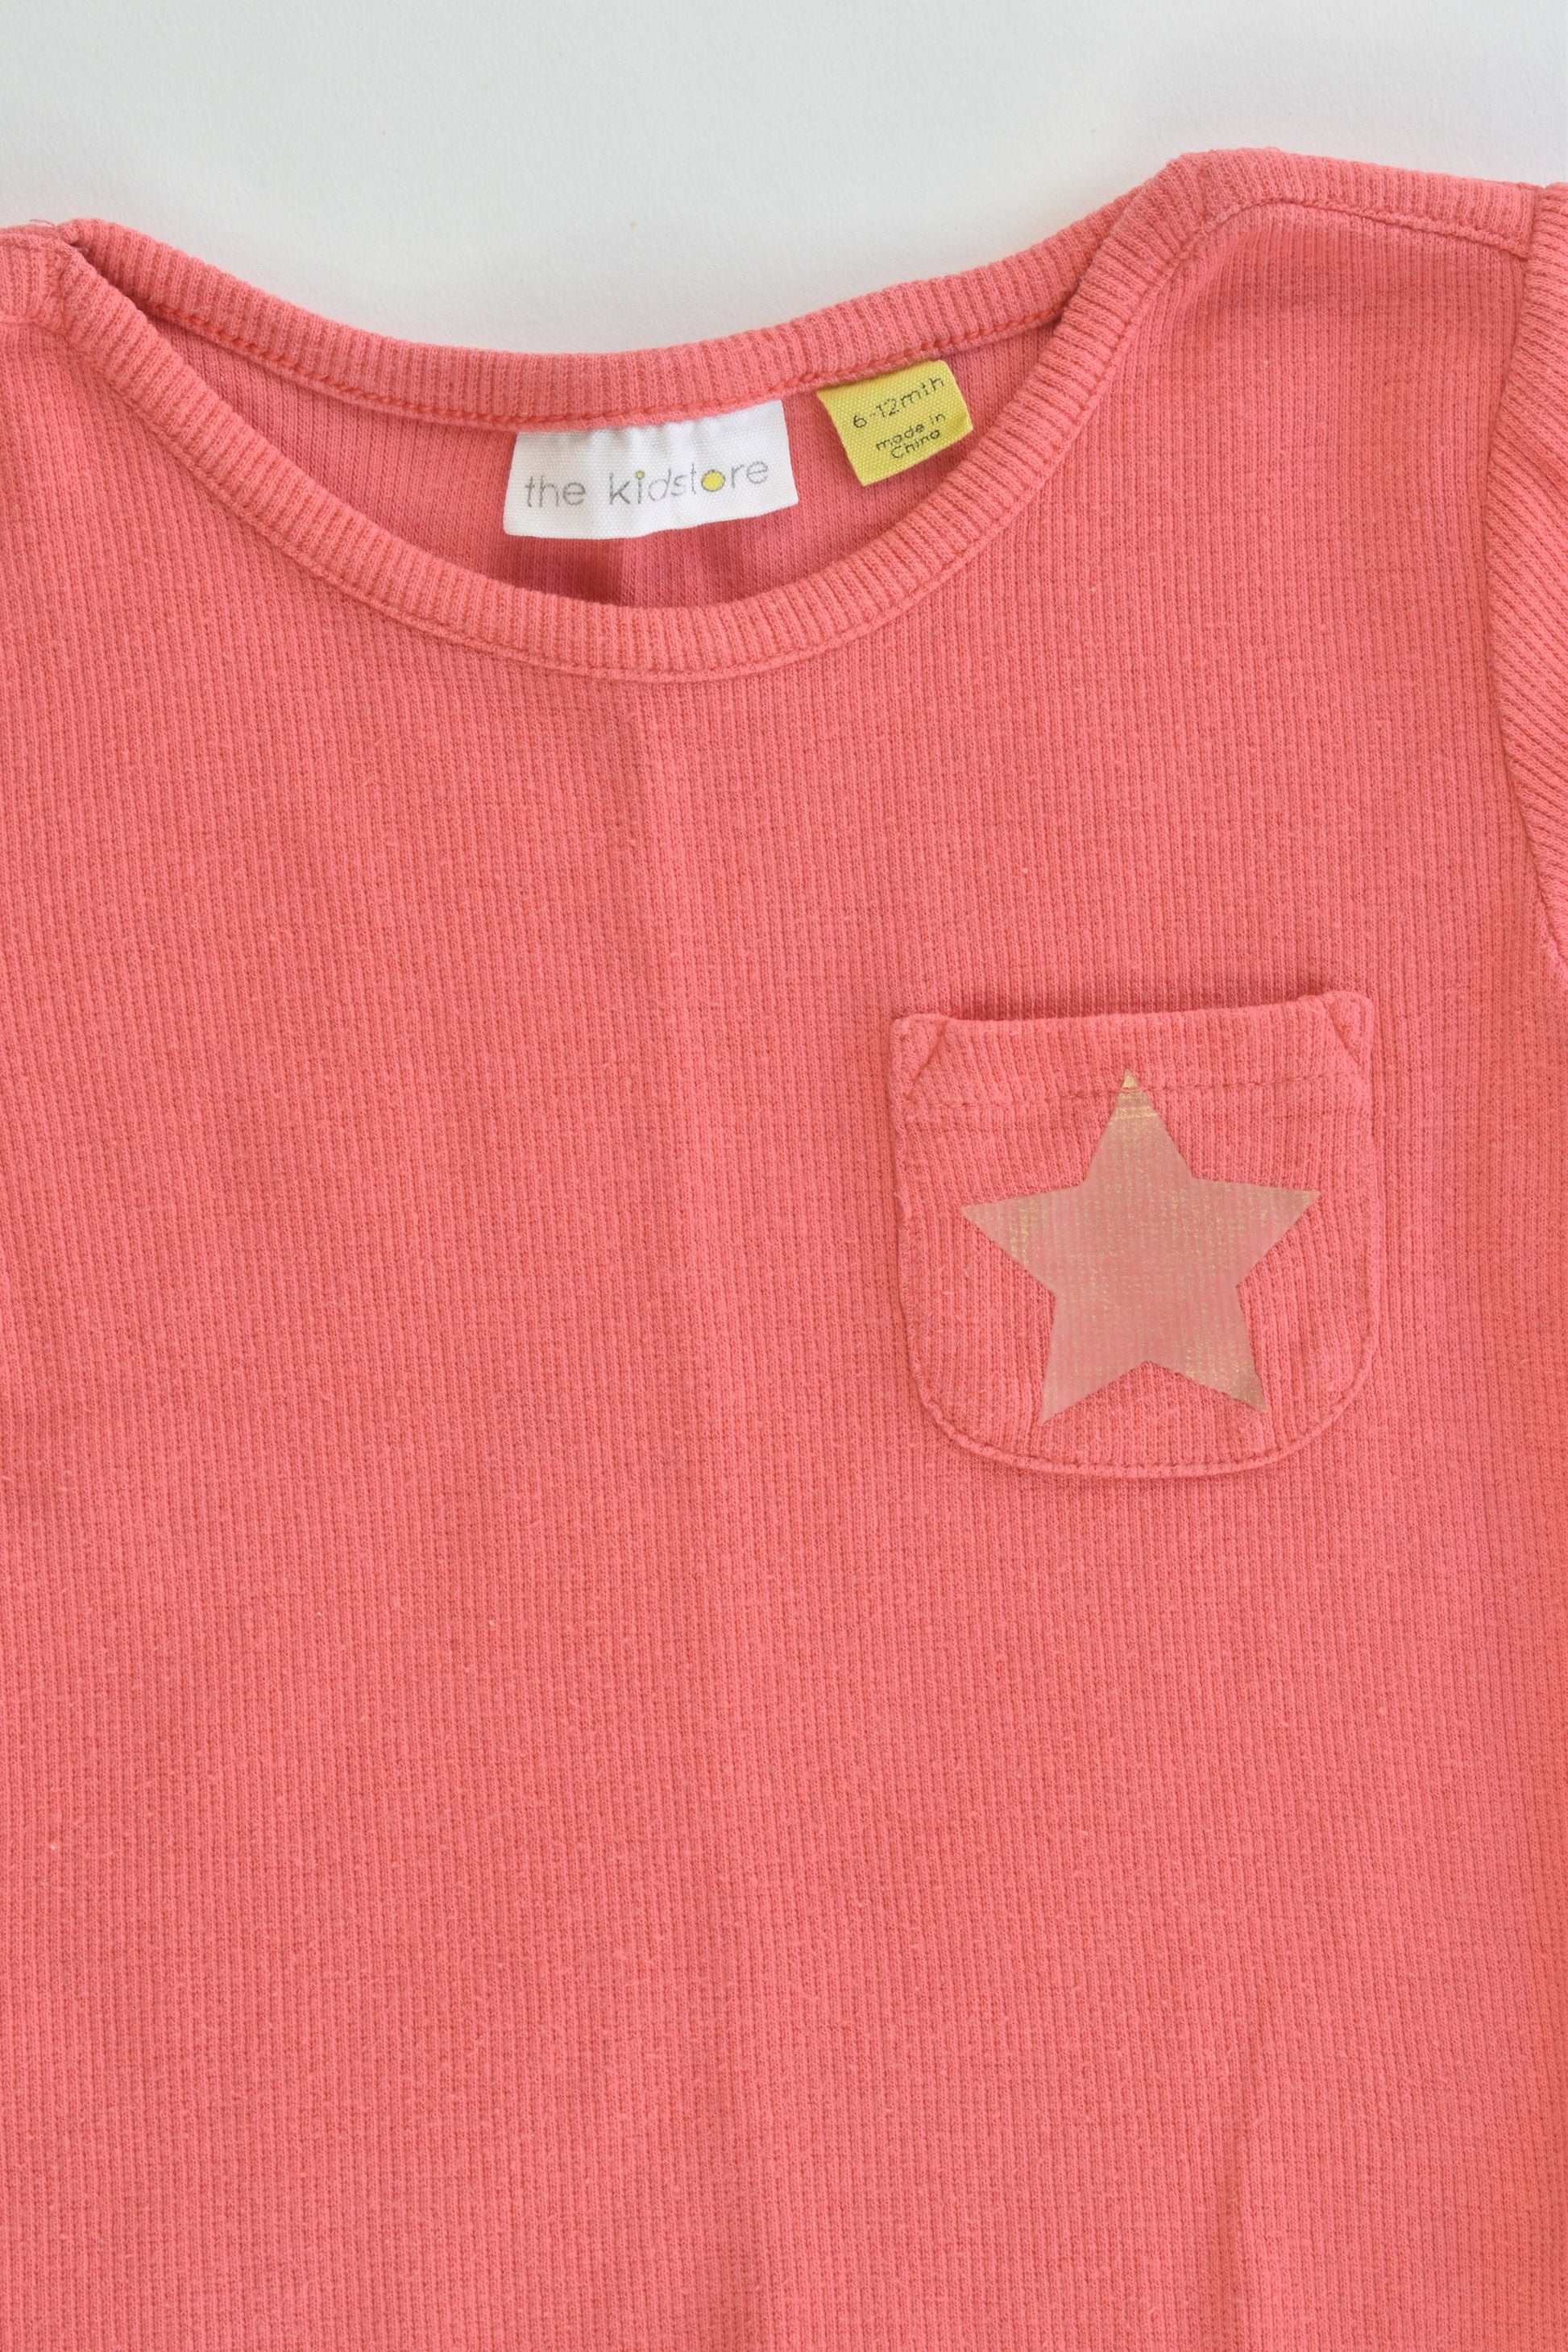 The Kids Store Size 6-12 months Ribbed Top